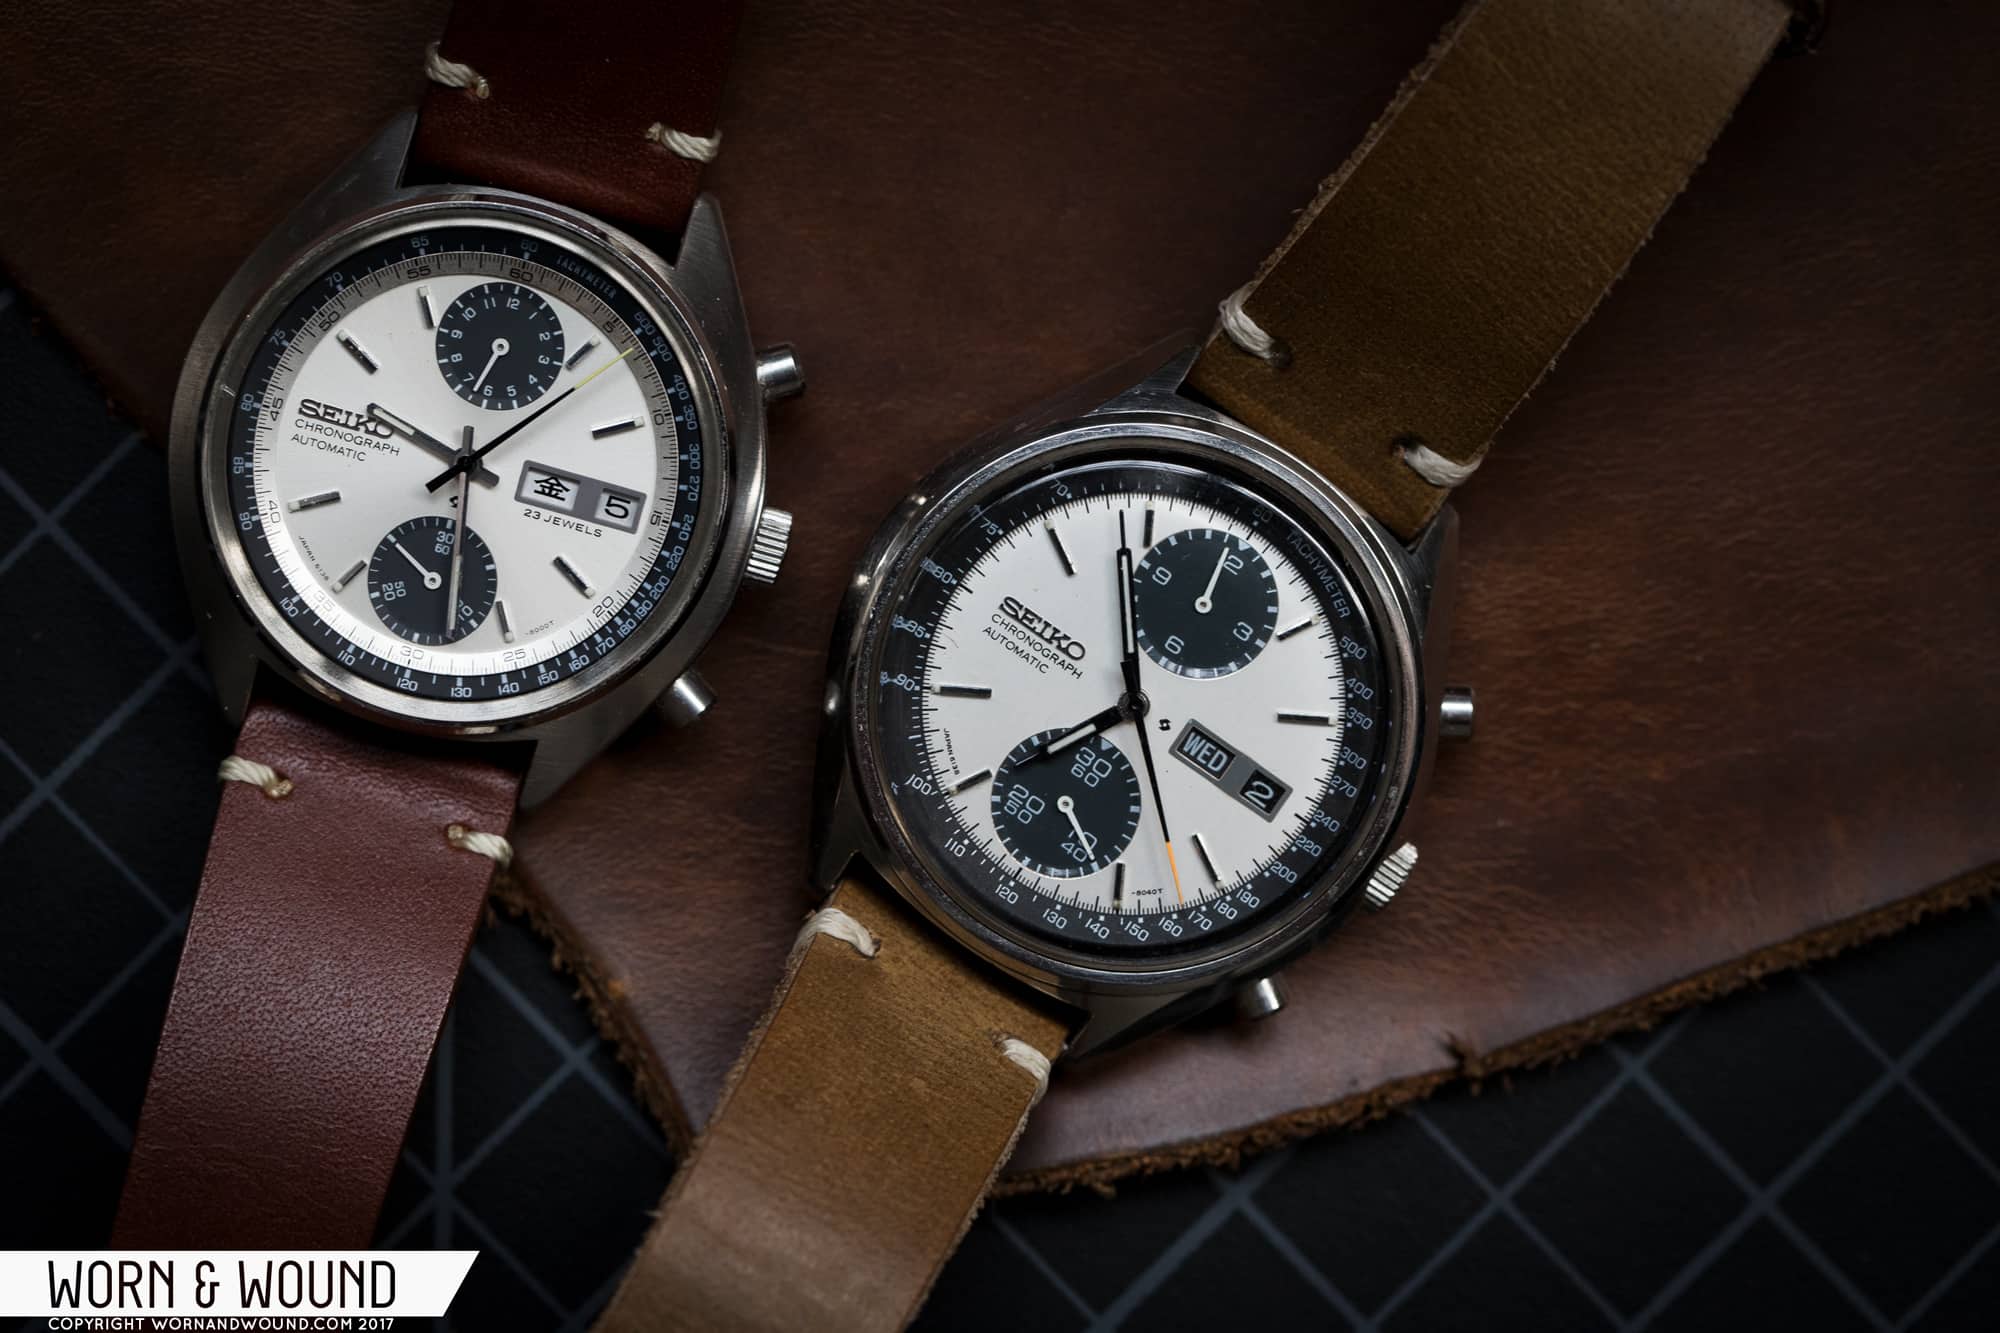 My Watch: Collecting Seiko Chronographs with WatchRecon’s Sammy Sy